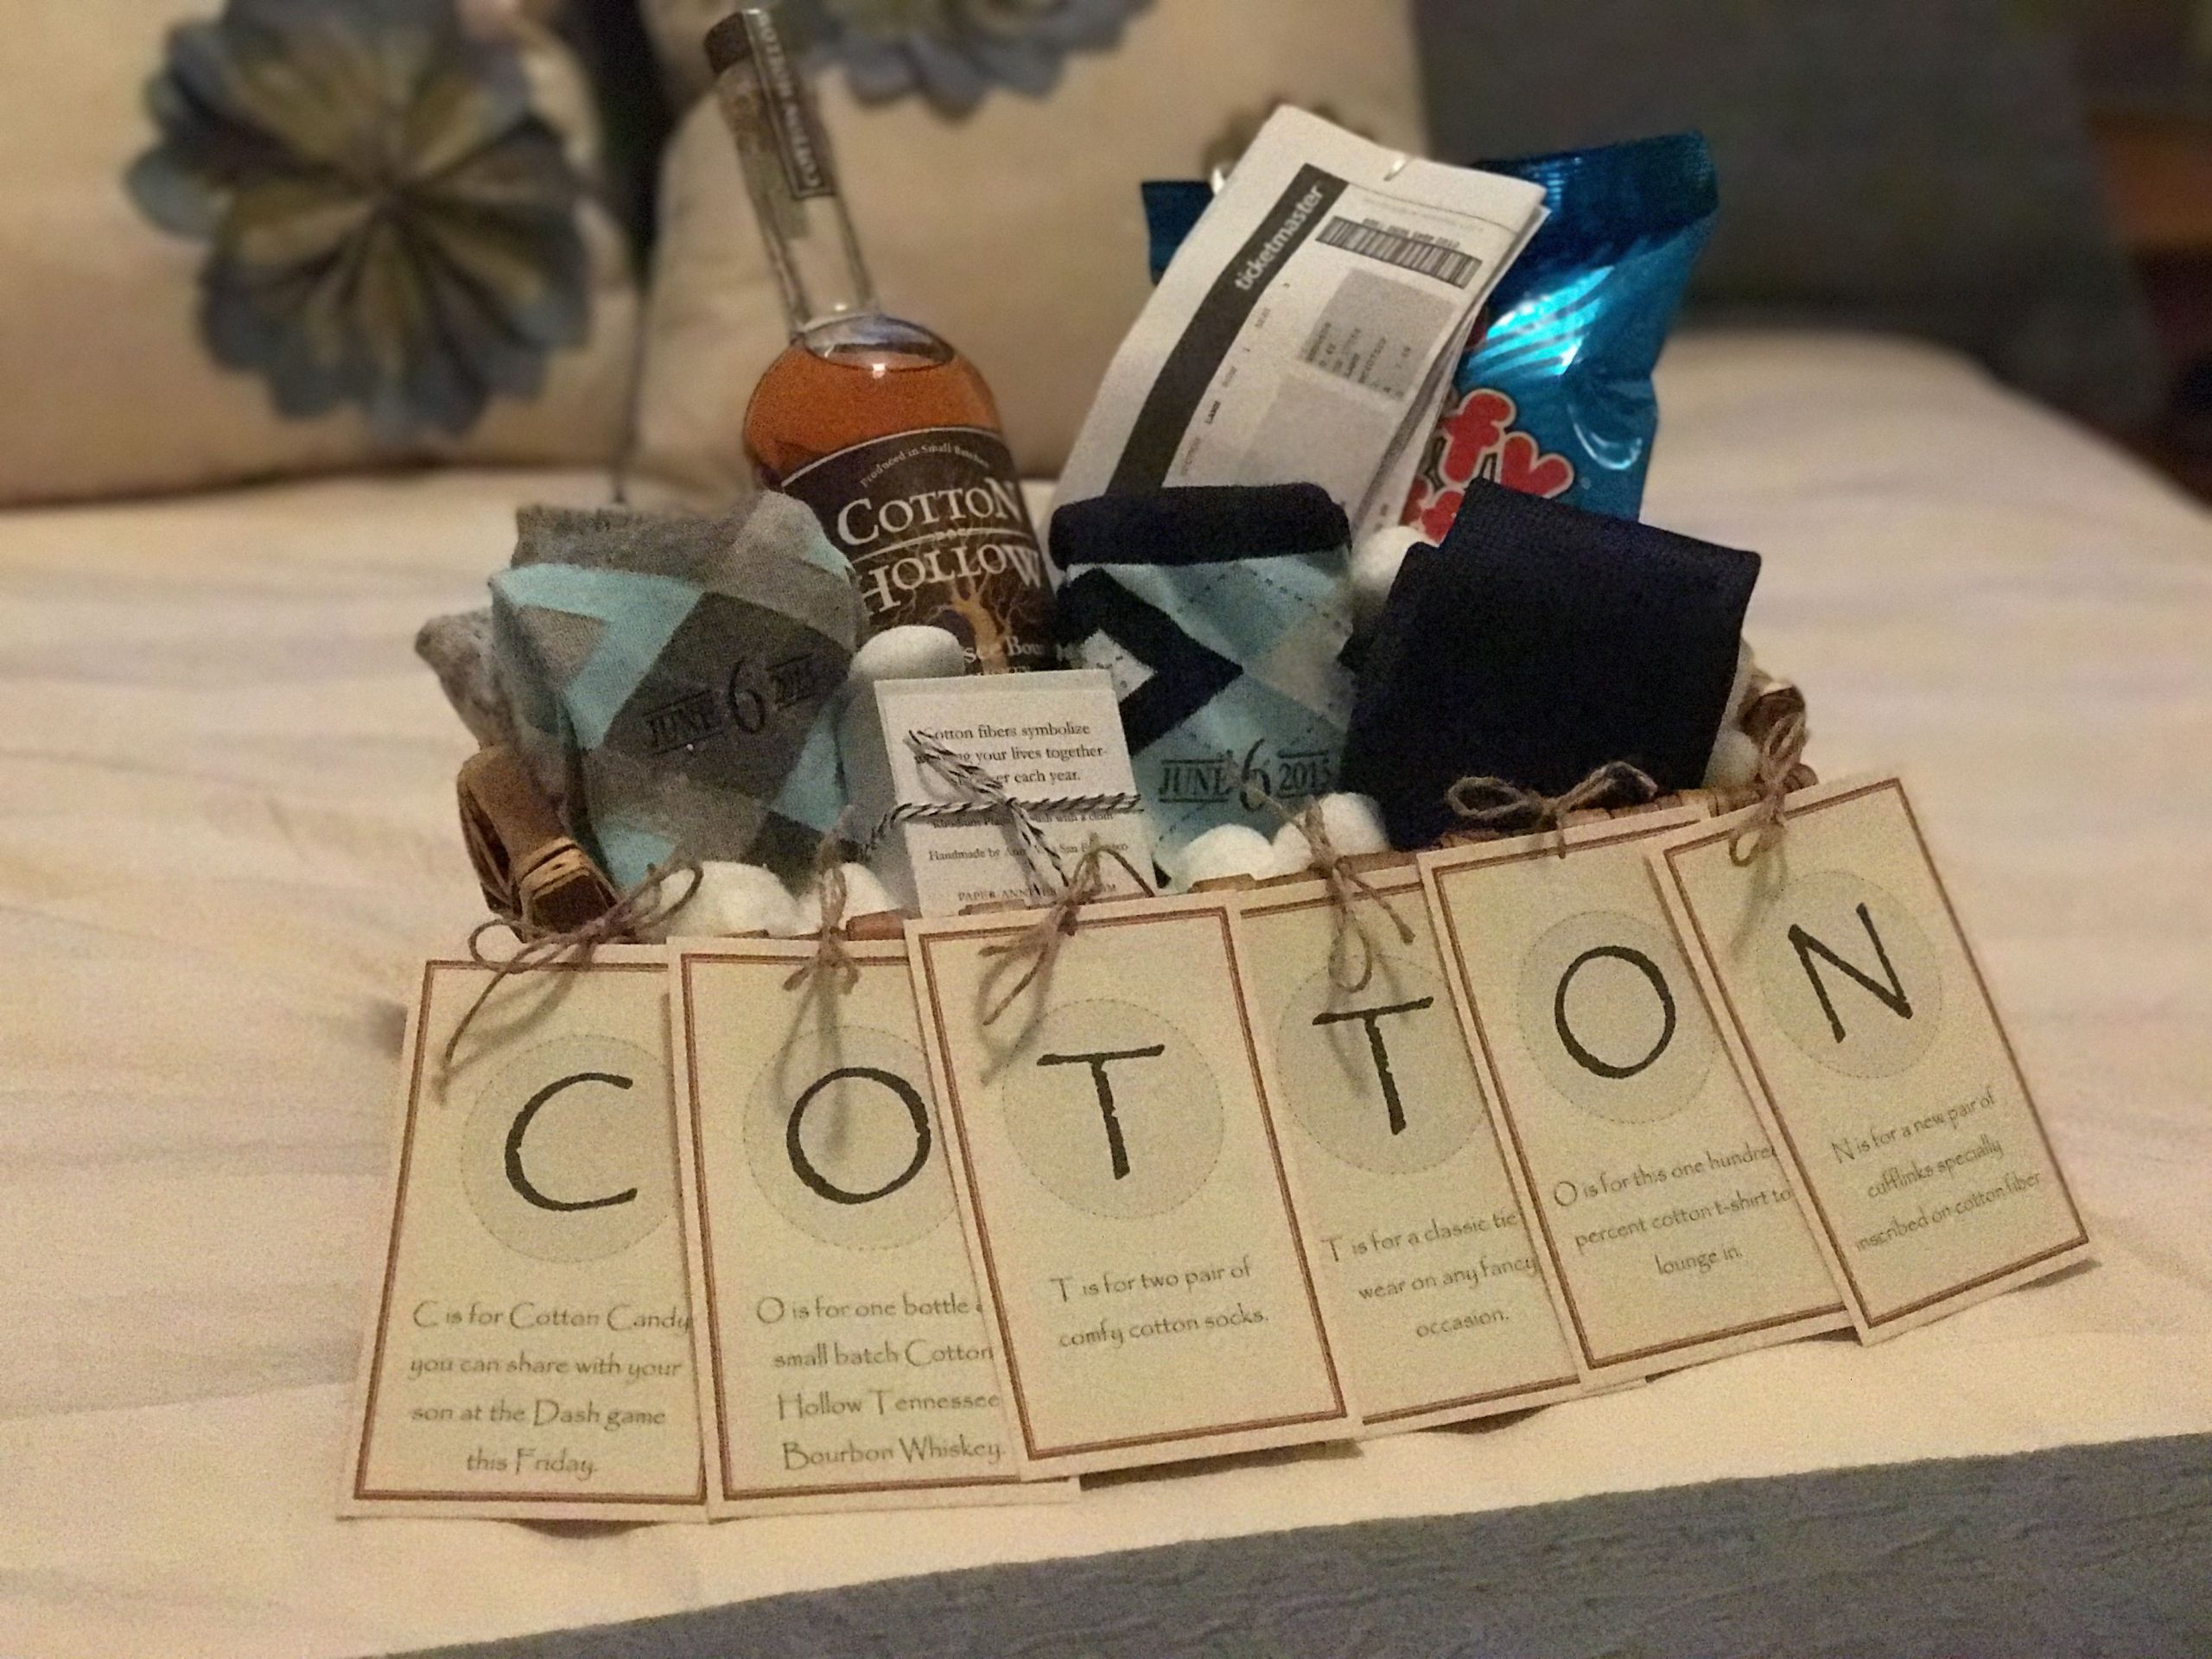 2Nd Year Anniversary Gift Ideas For Husband
 The "Cotton" Anniversary Gift for Him